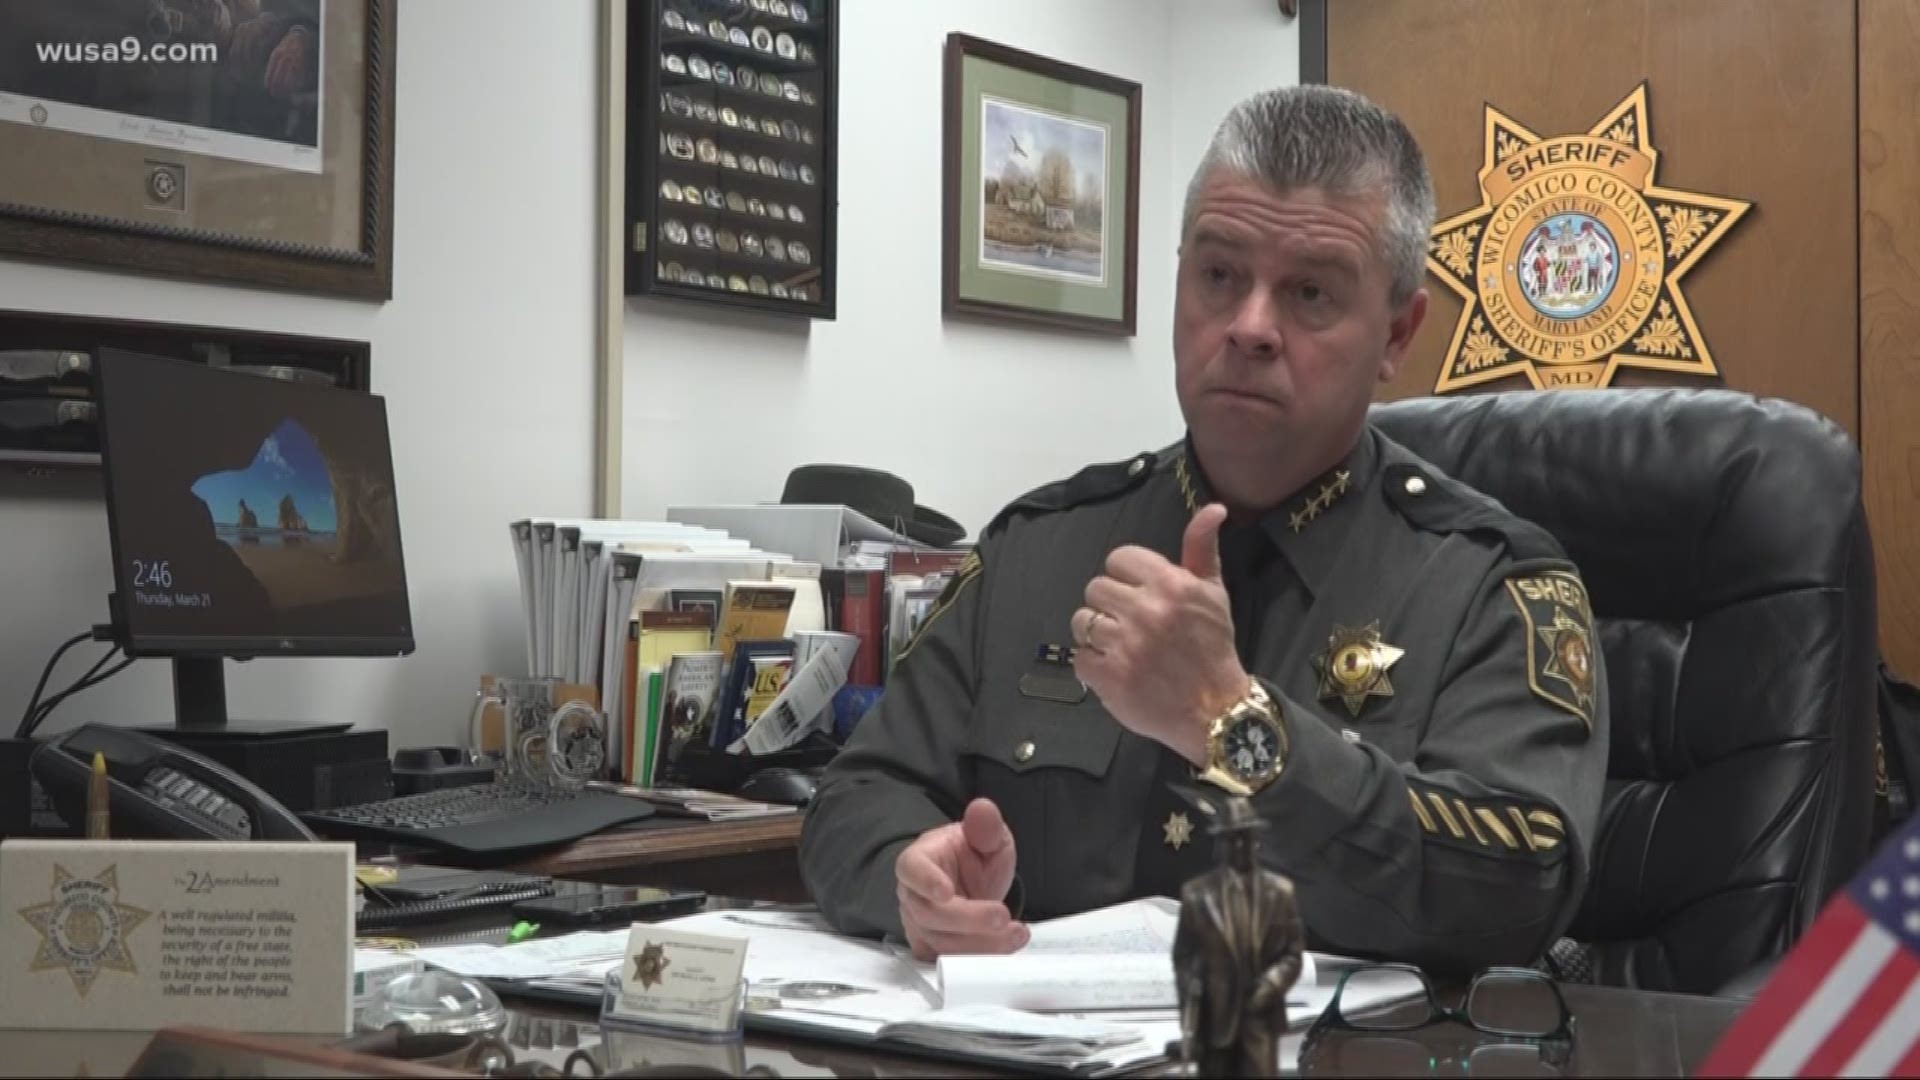 He's the Maryland Sheriff who's says he will not enforce any new gun laws in his state. Sheriff Mike Lewis of Wicomico County also warns of a Civil War over the gun rights issue.